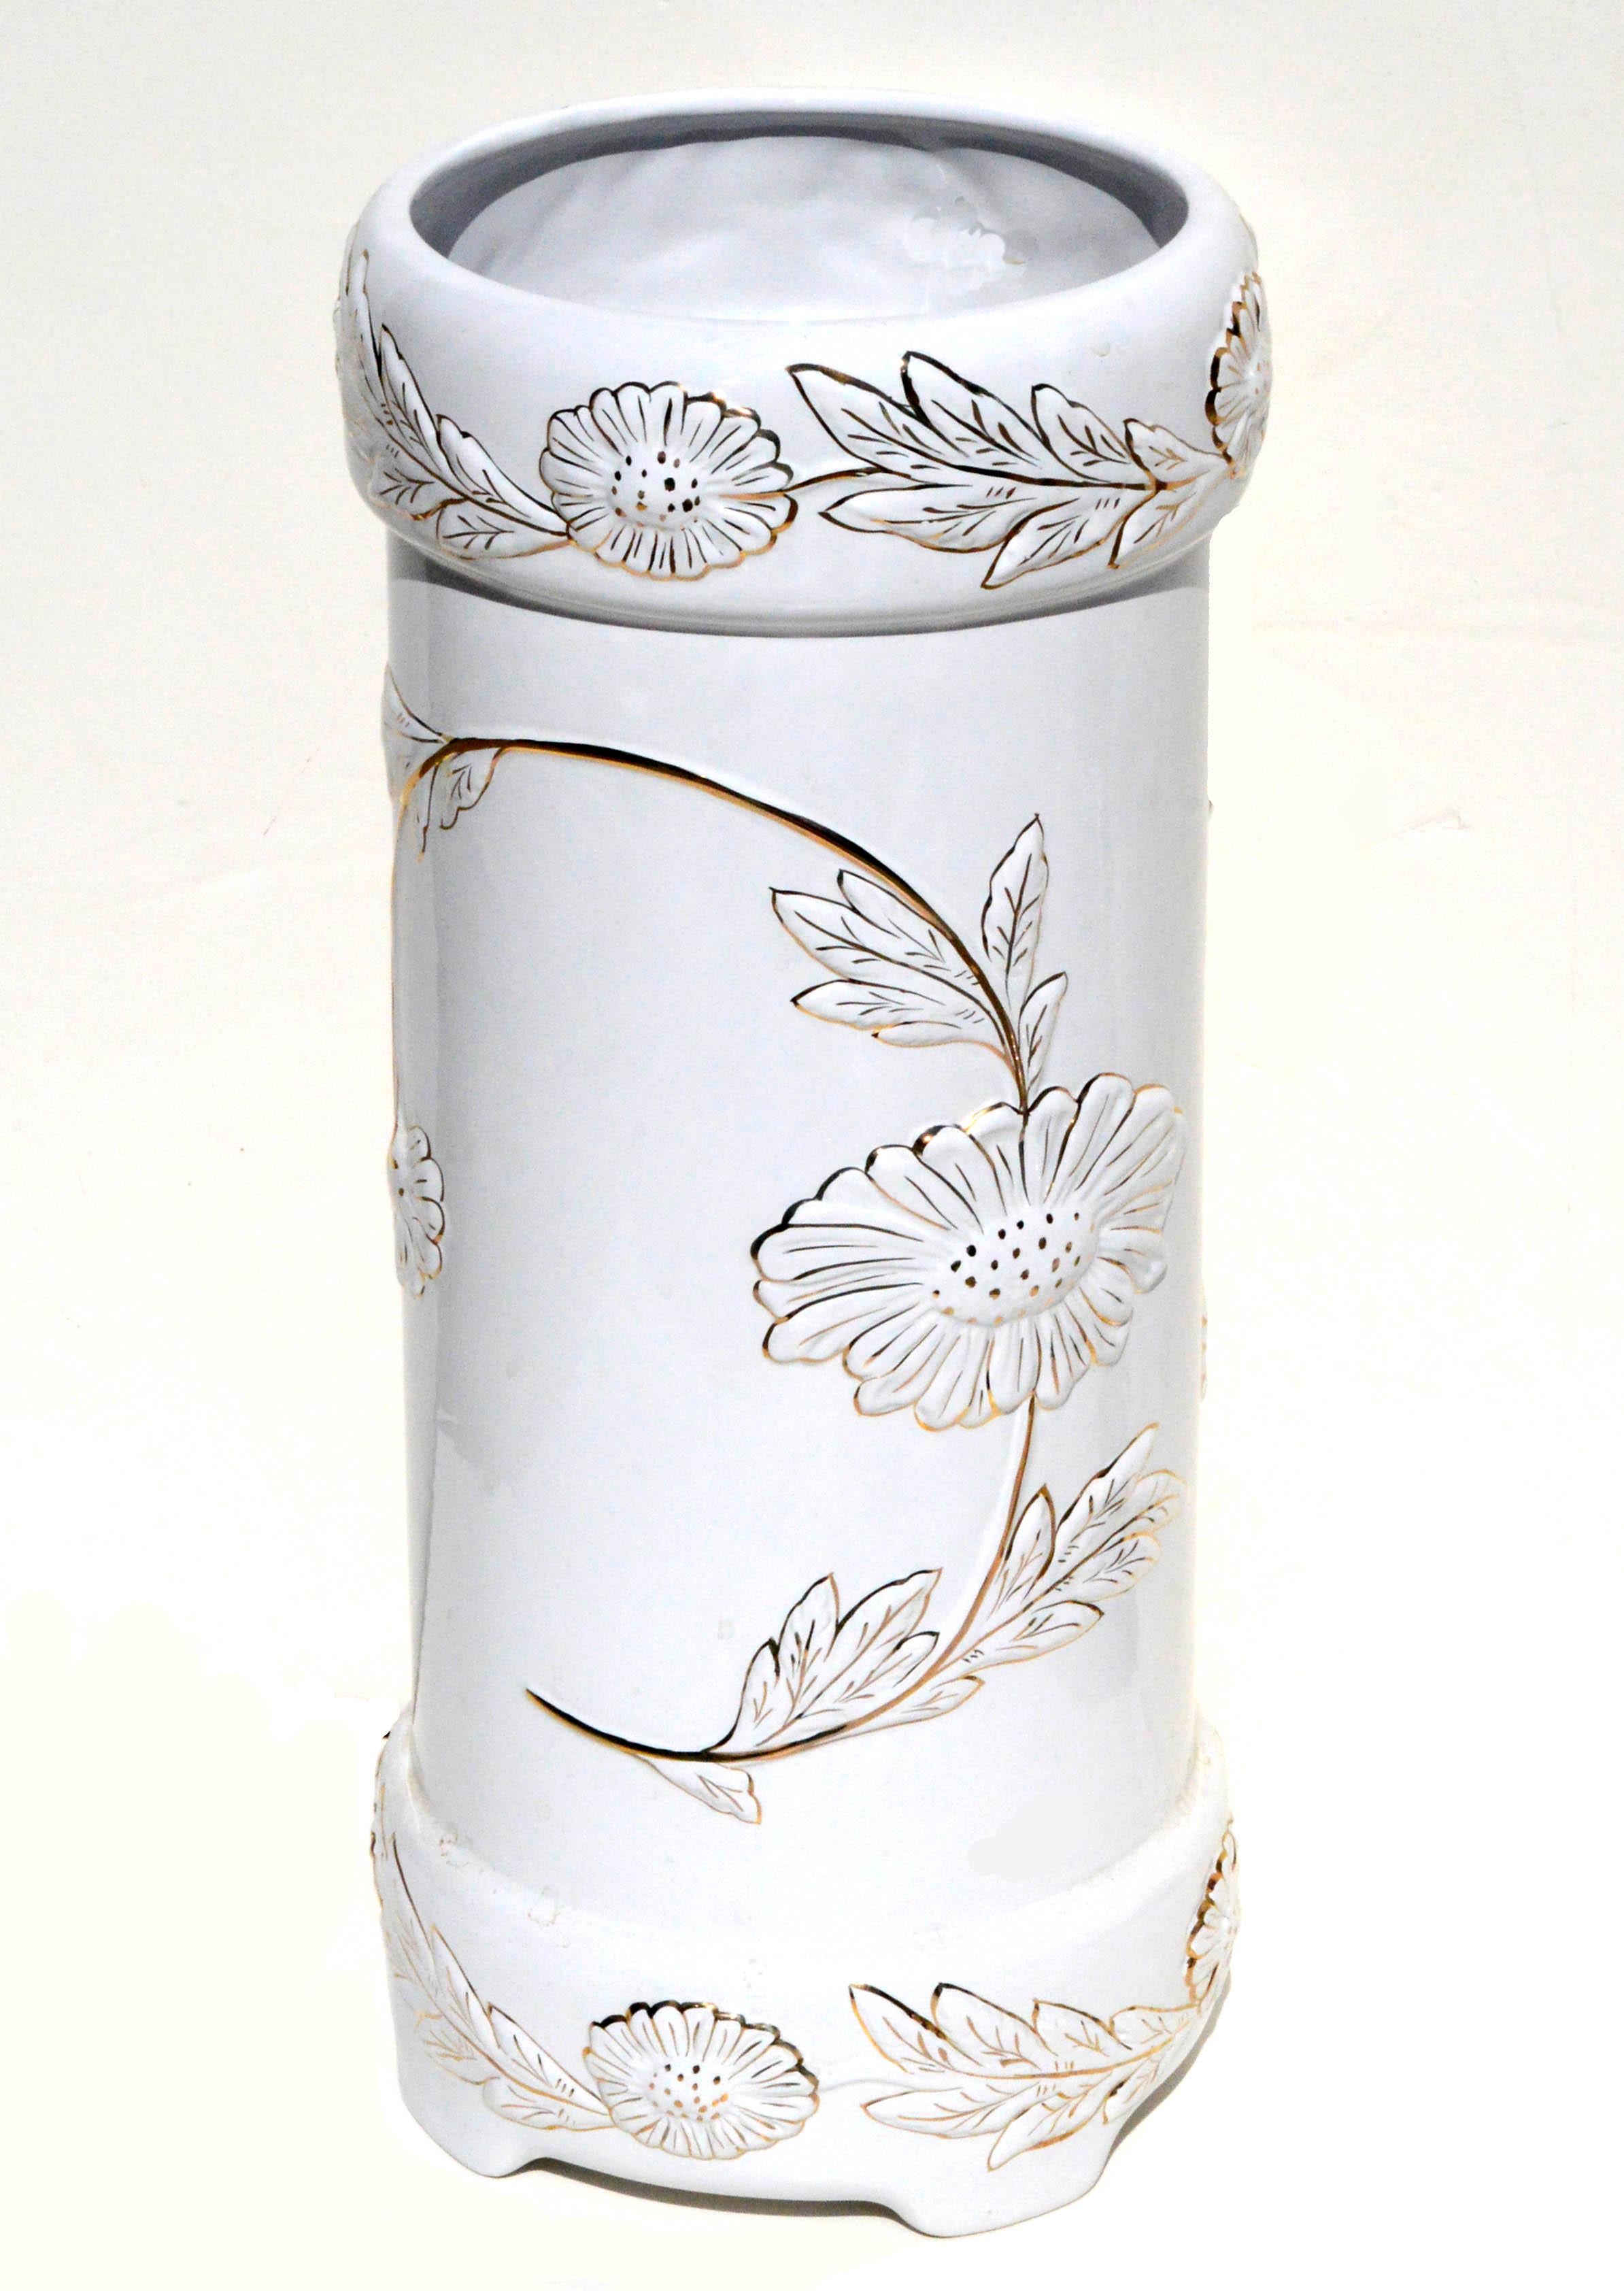 Lovely pair of white and gold Hollywood Regency style ceramic umbrella stand and jardiniere made by Alcobaca Portugal. Raised gold flowers, vines and leaves add depth and interest.

 Umbrella stand is 19